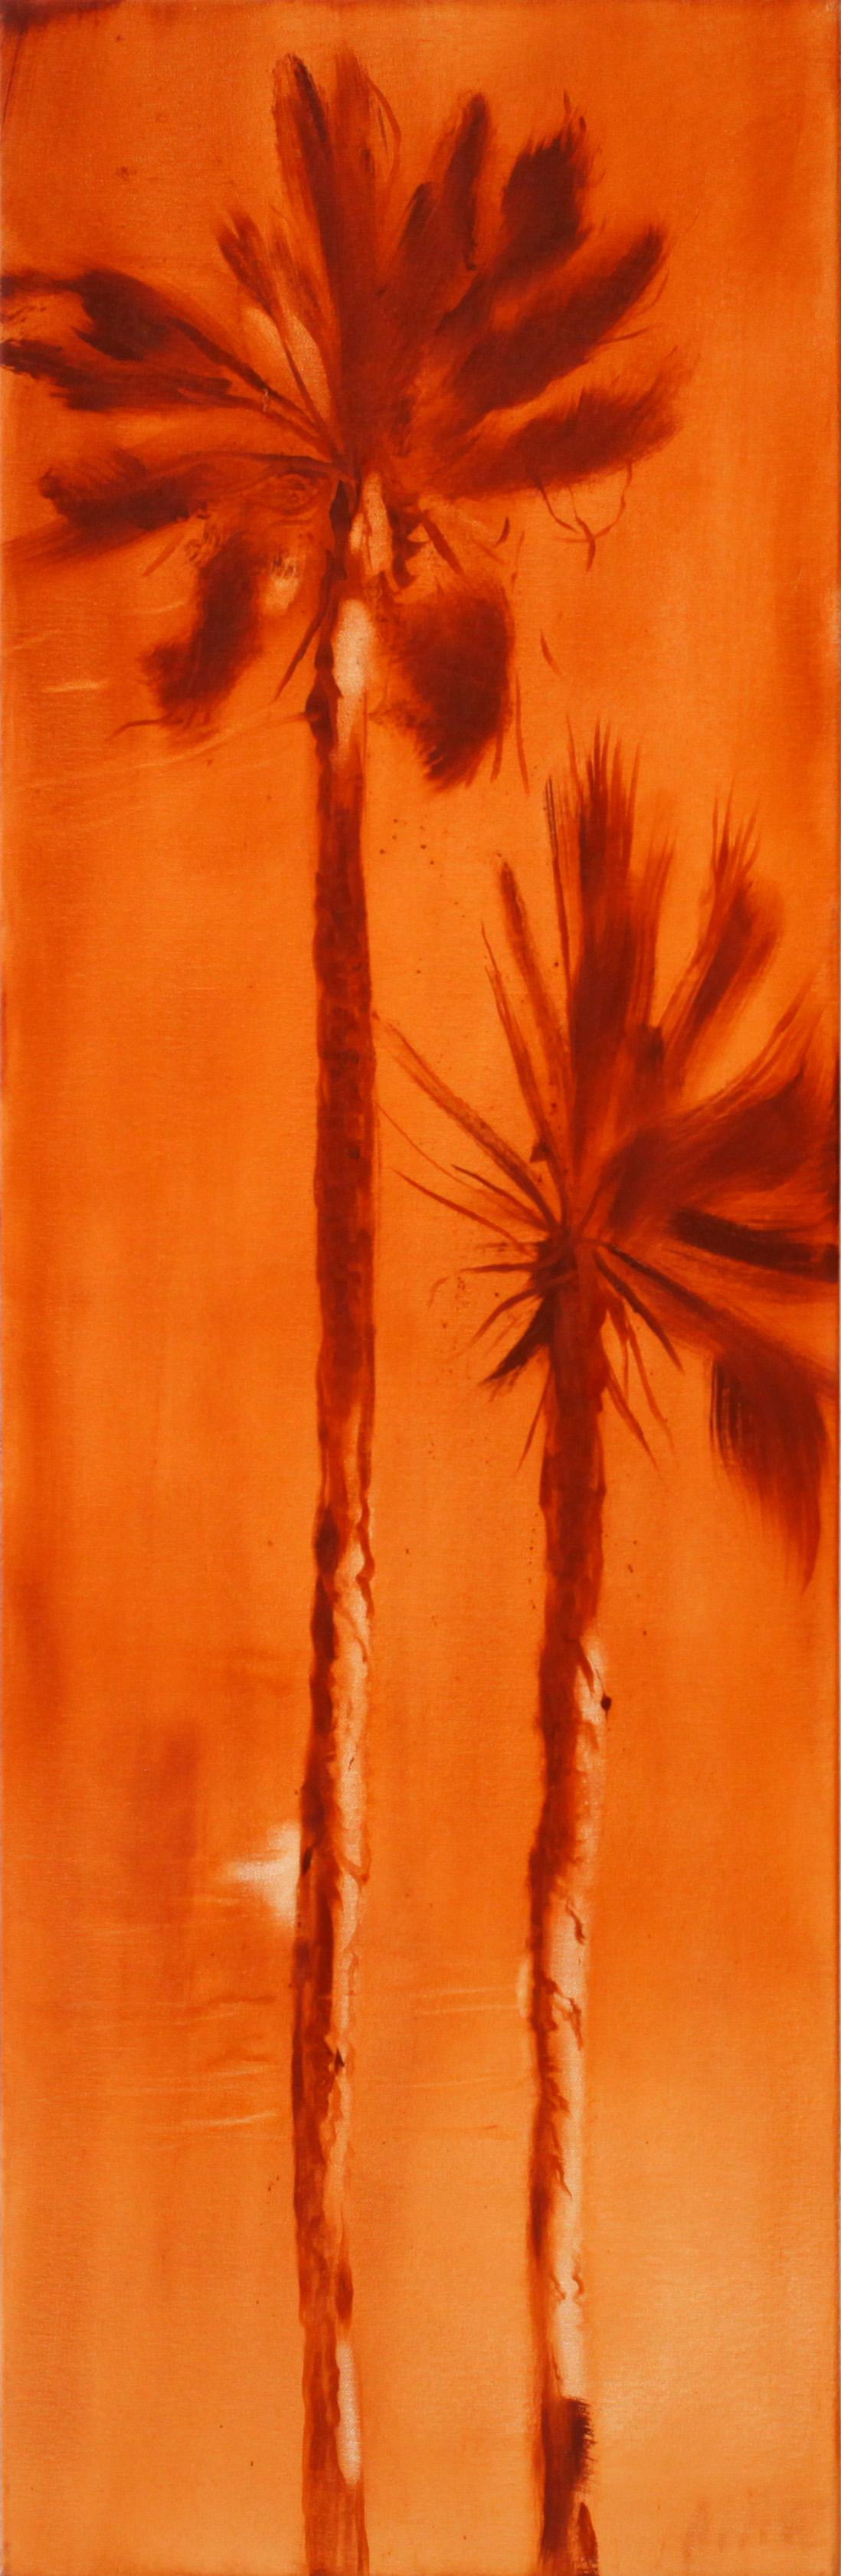 Perry Vàsquez Landscape Painting - Conceptual Realistic Palm Tree Oil Painting, "Inferno 4"